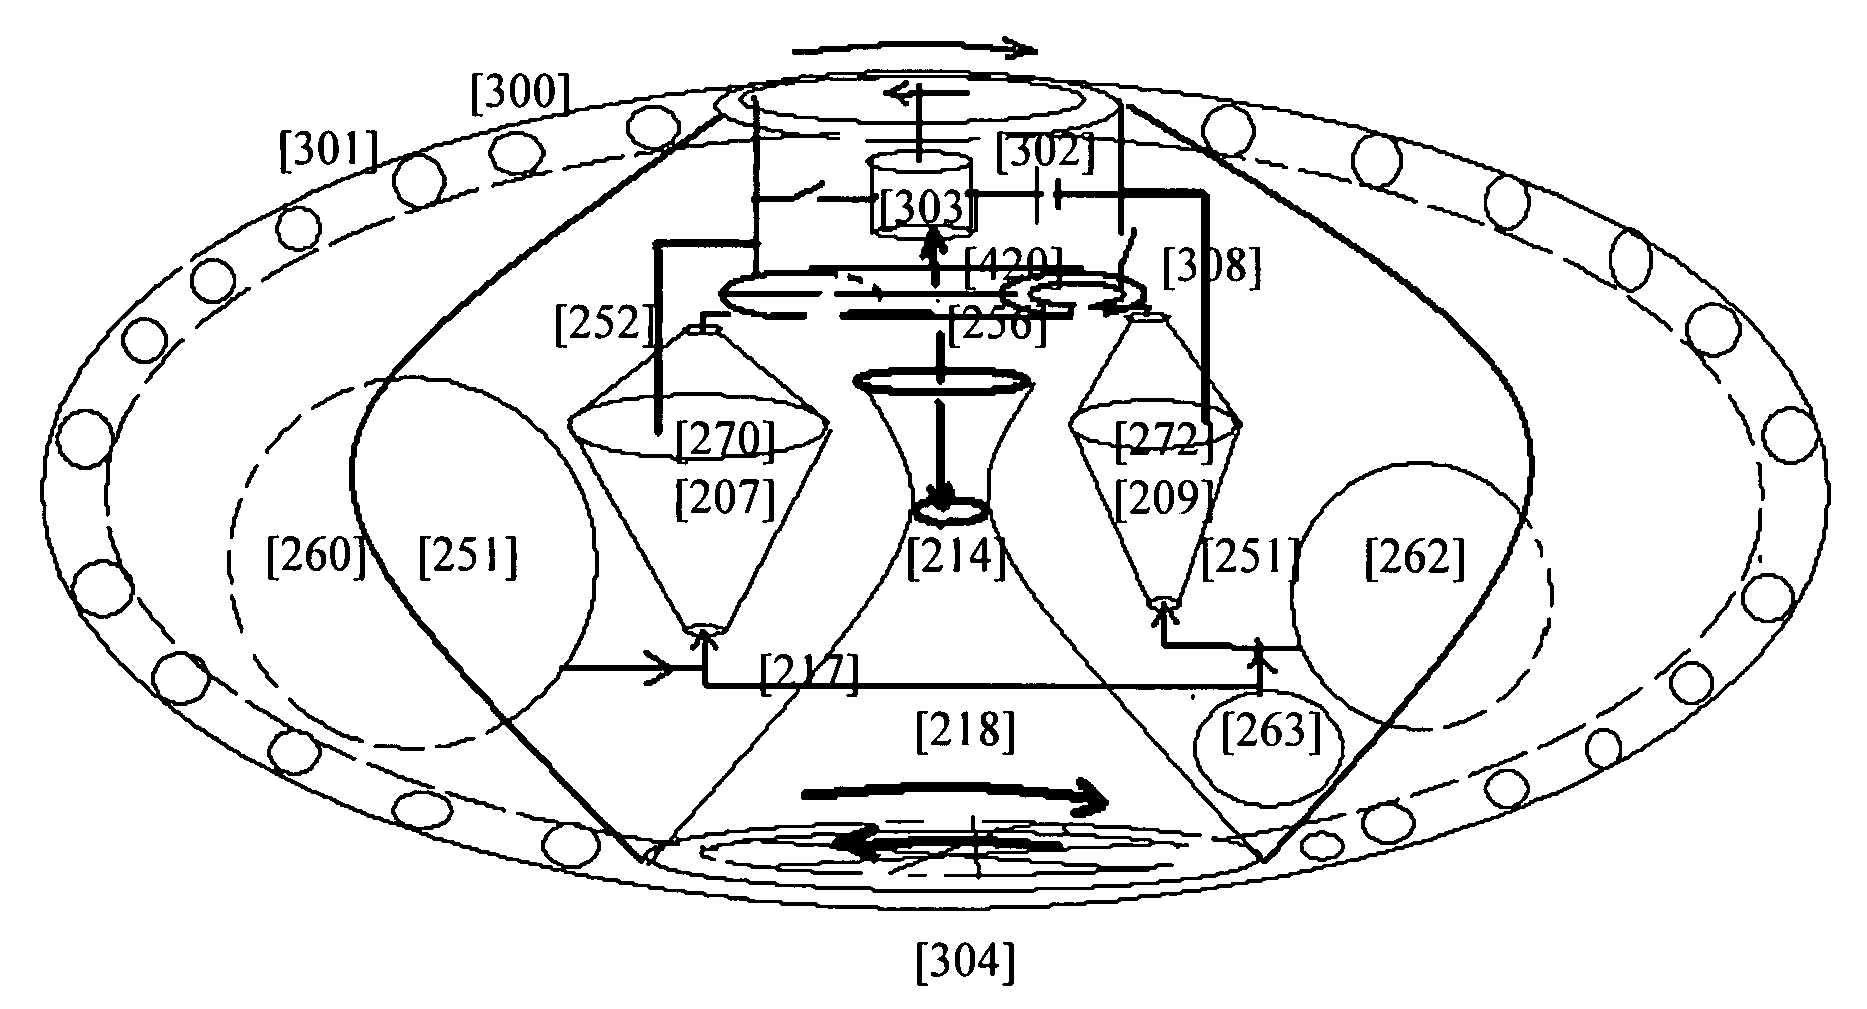 Dual-plasma-fusion jet thrusters using DC turbo-contacting generator as its electrical power source